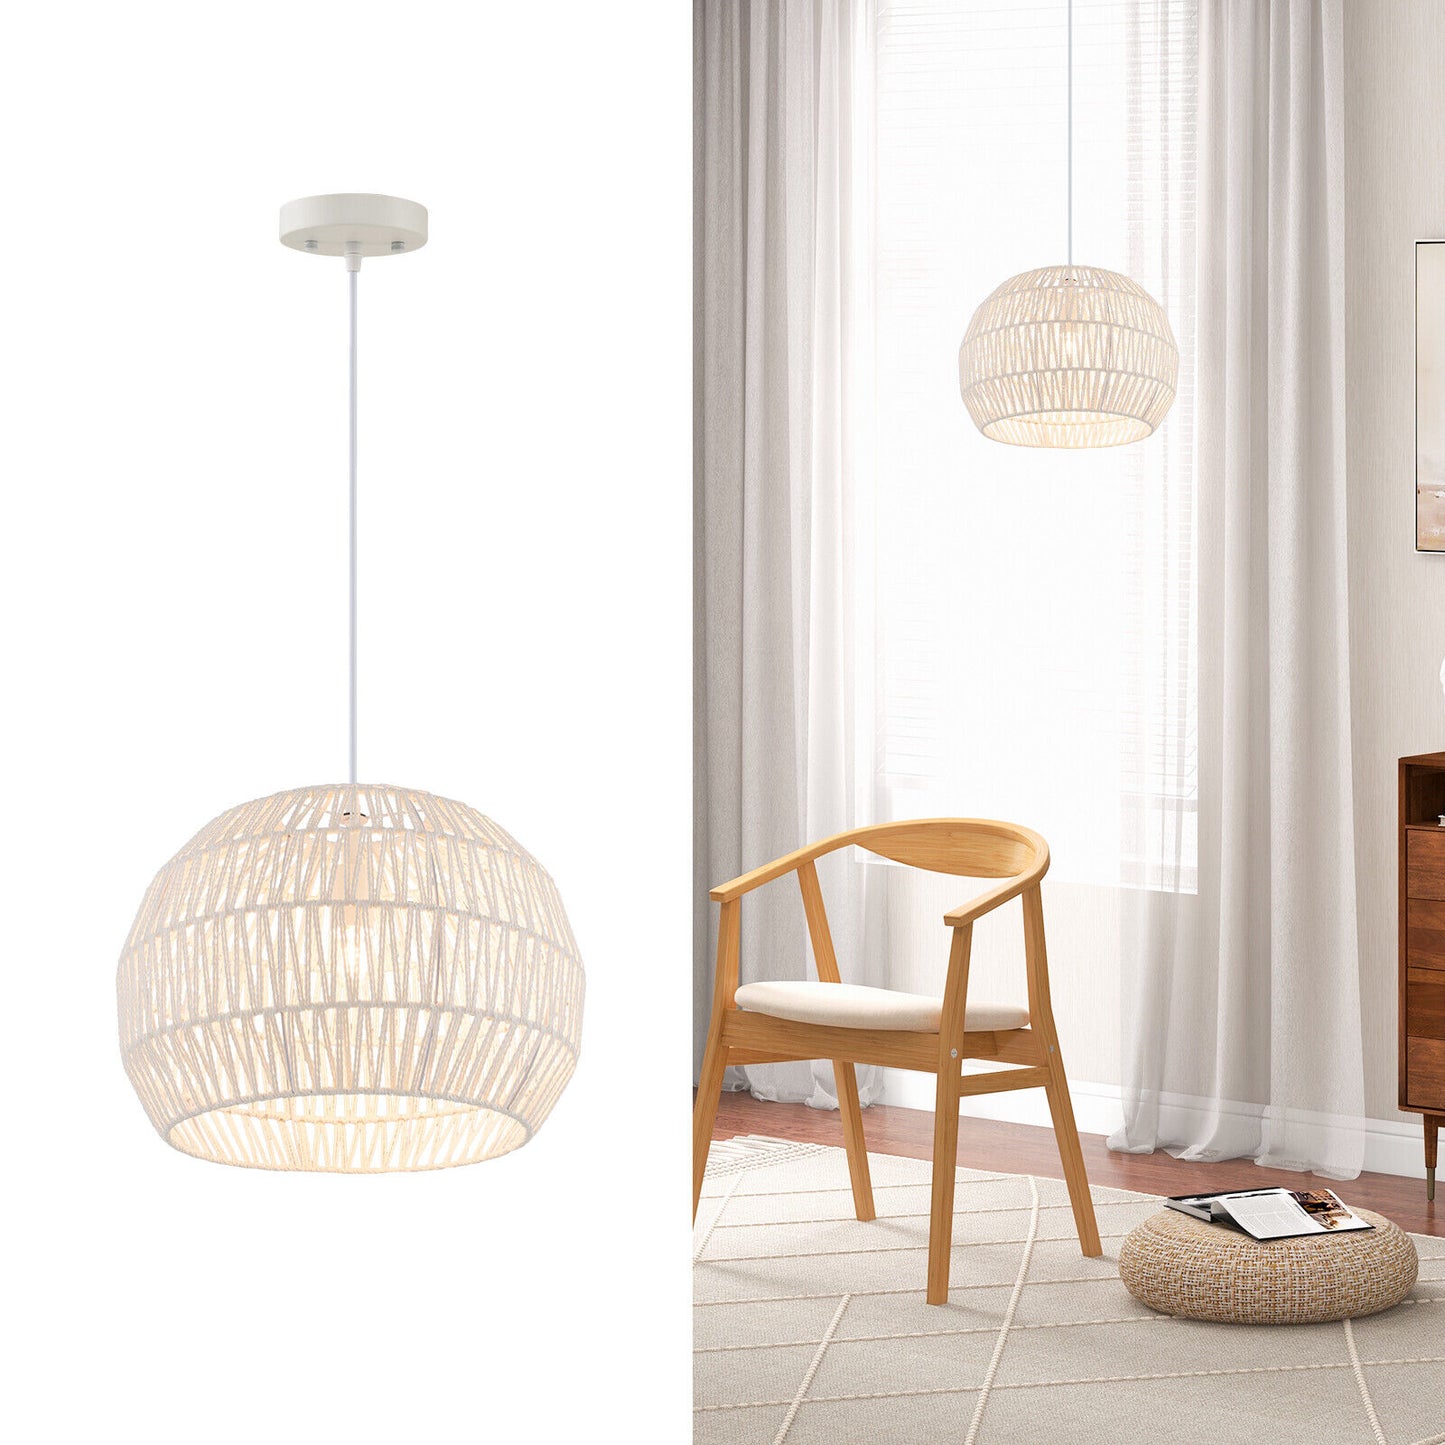 Ceiling Light - Round Pendant Light With Adjustable Hanging Rope